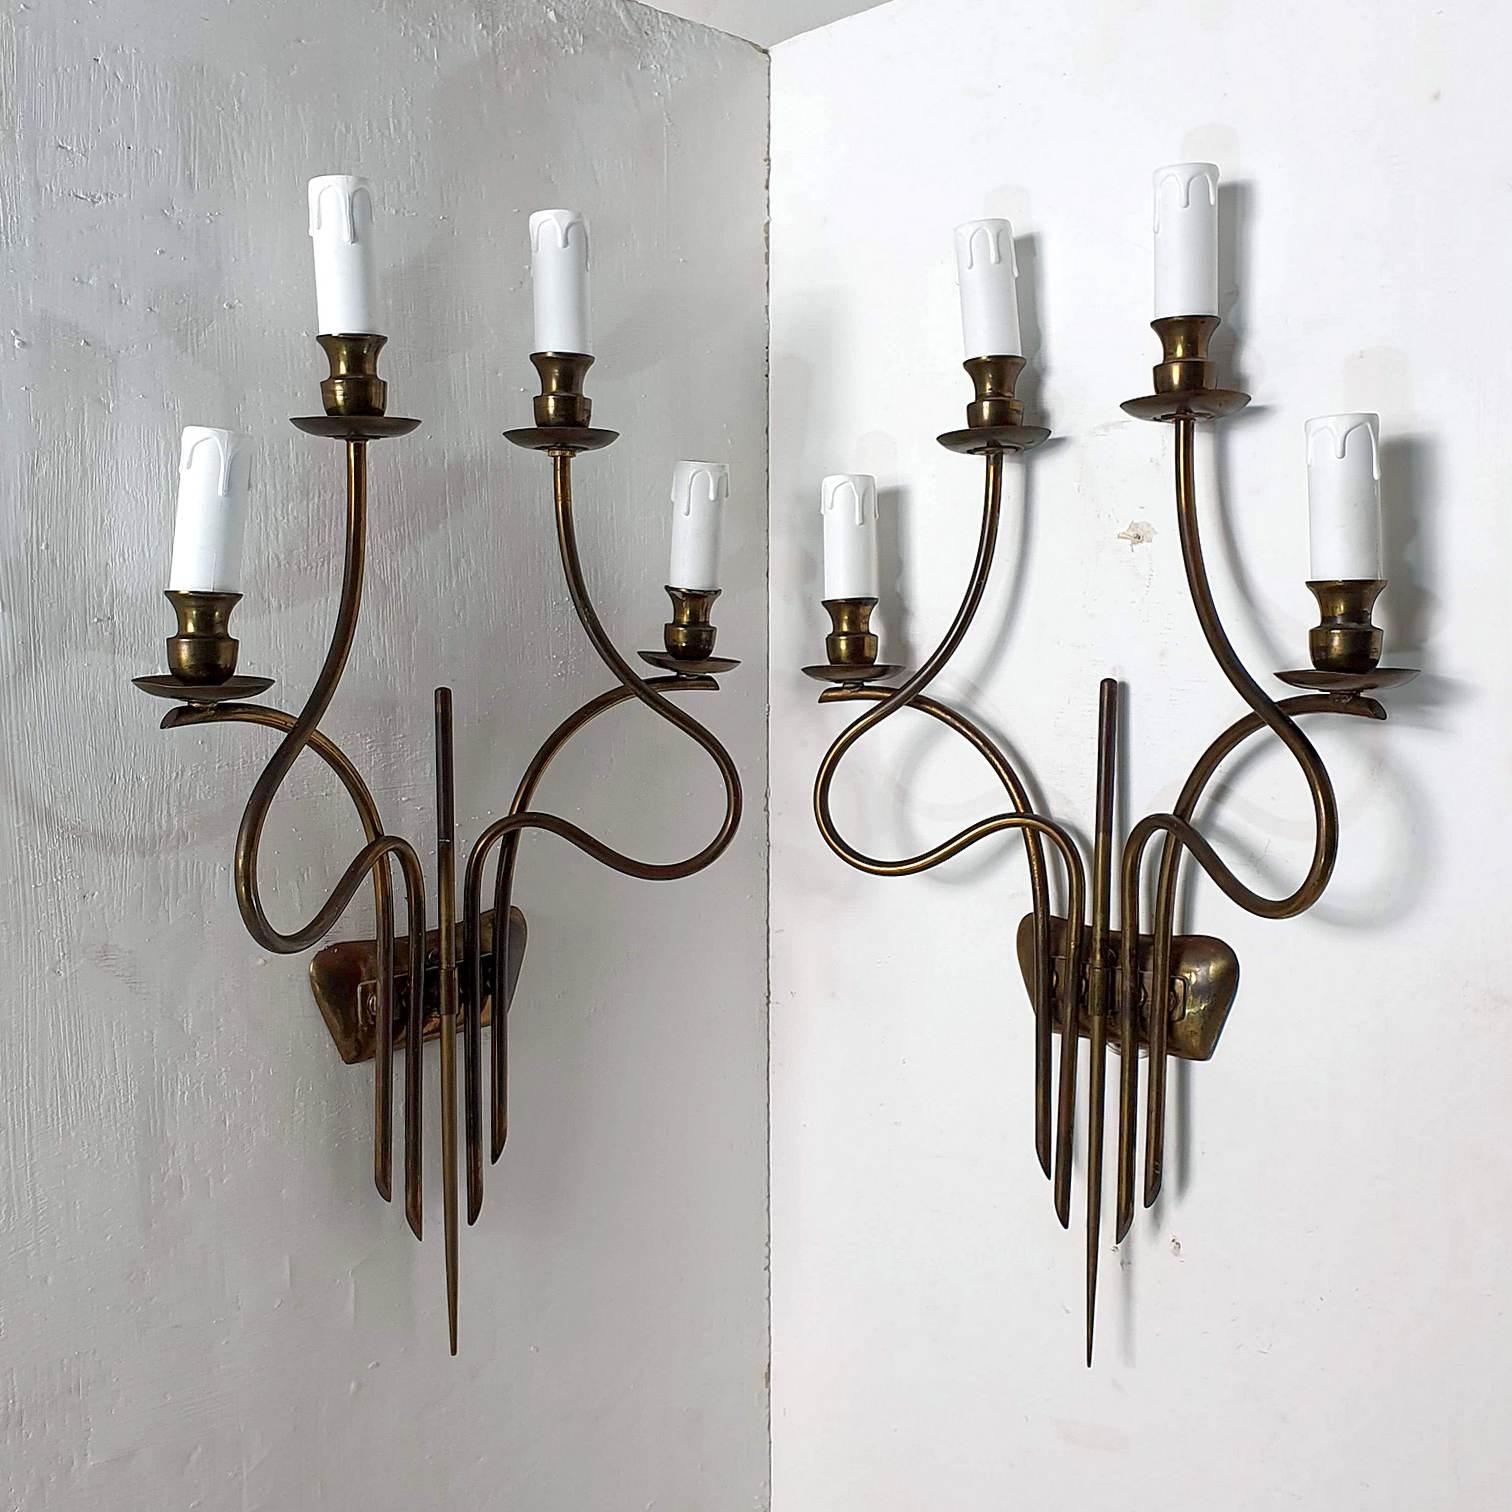 An unusual pair of large mid-century brass sconces or wall lights by Guglielmo Ulrich, circa 1940's, Italy. The brass has not been polished but to show the original patina. Can be polished upon purchase.
Each with four E 14 light bulbs. Fully